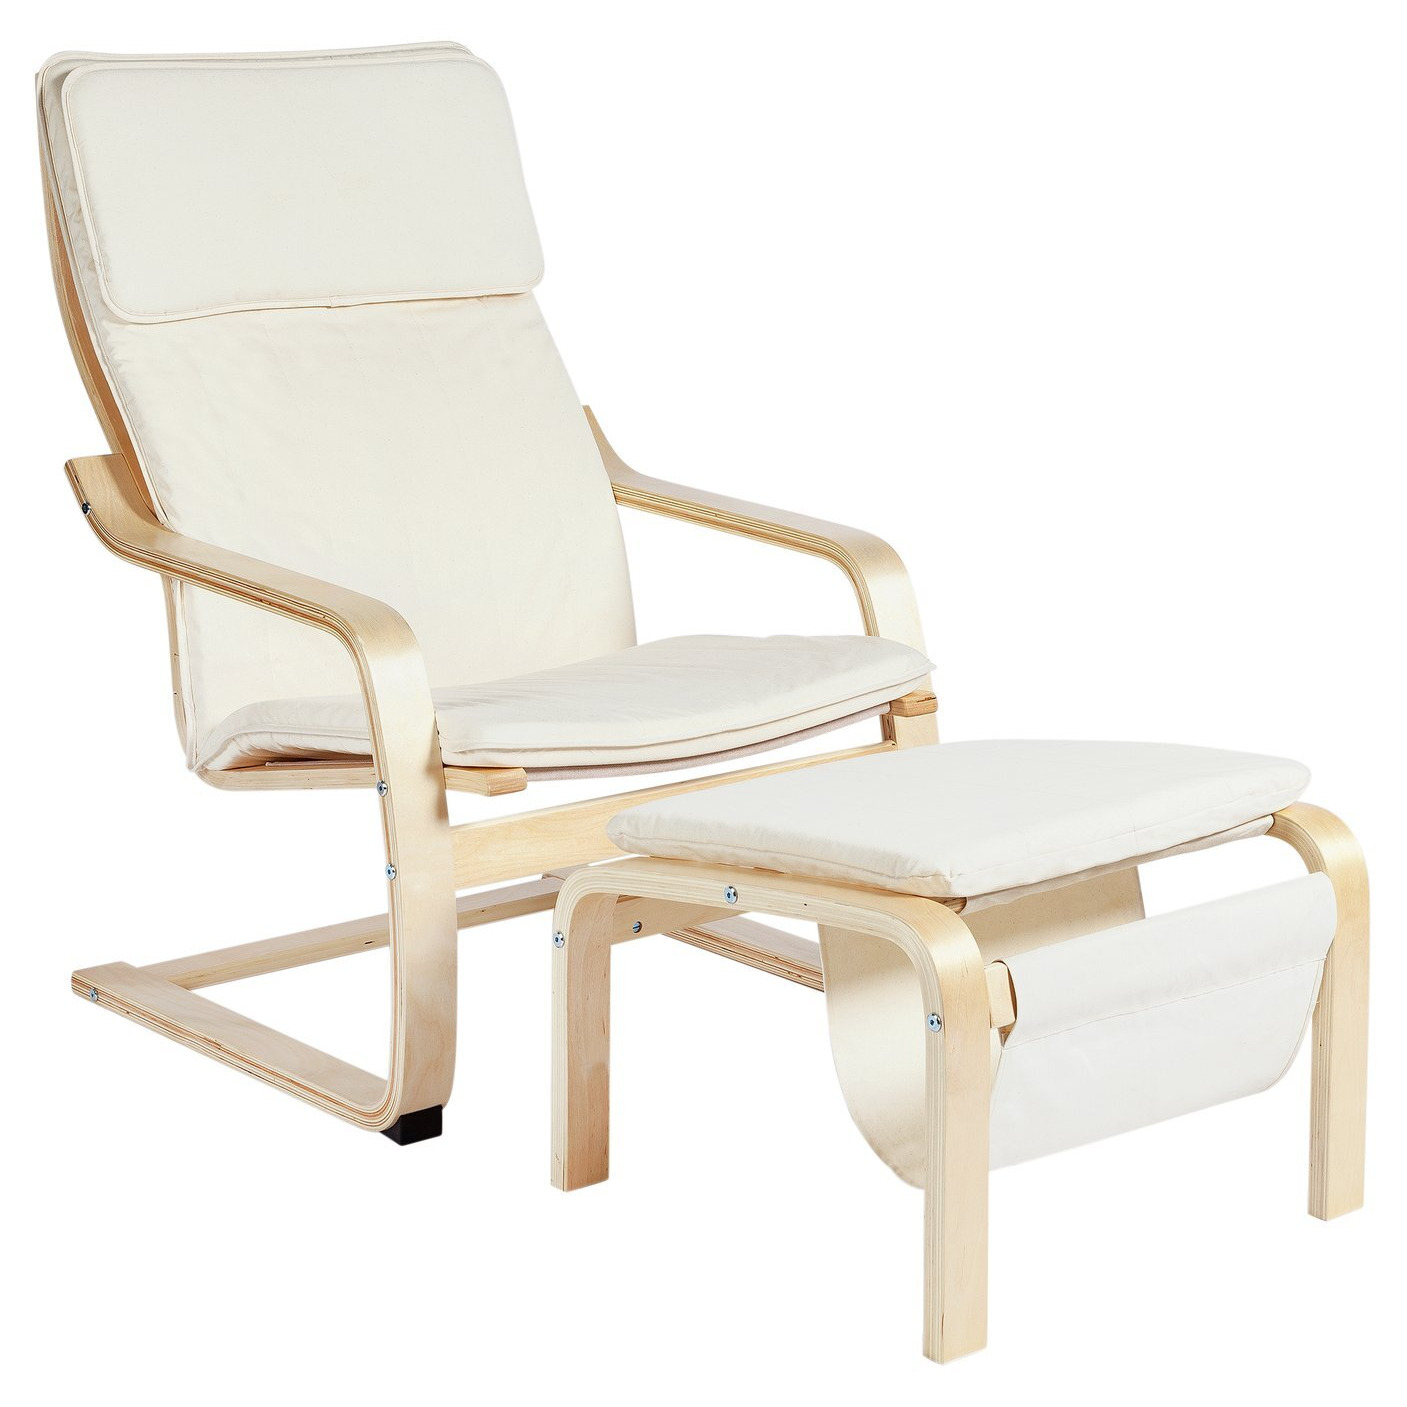 Argos Home Bentwood Chair with Footstool - Natural - image 1